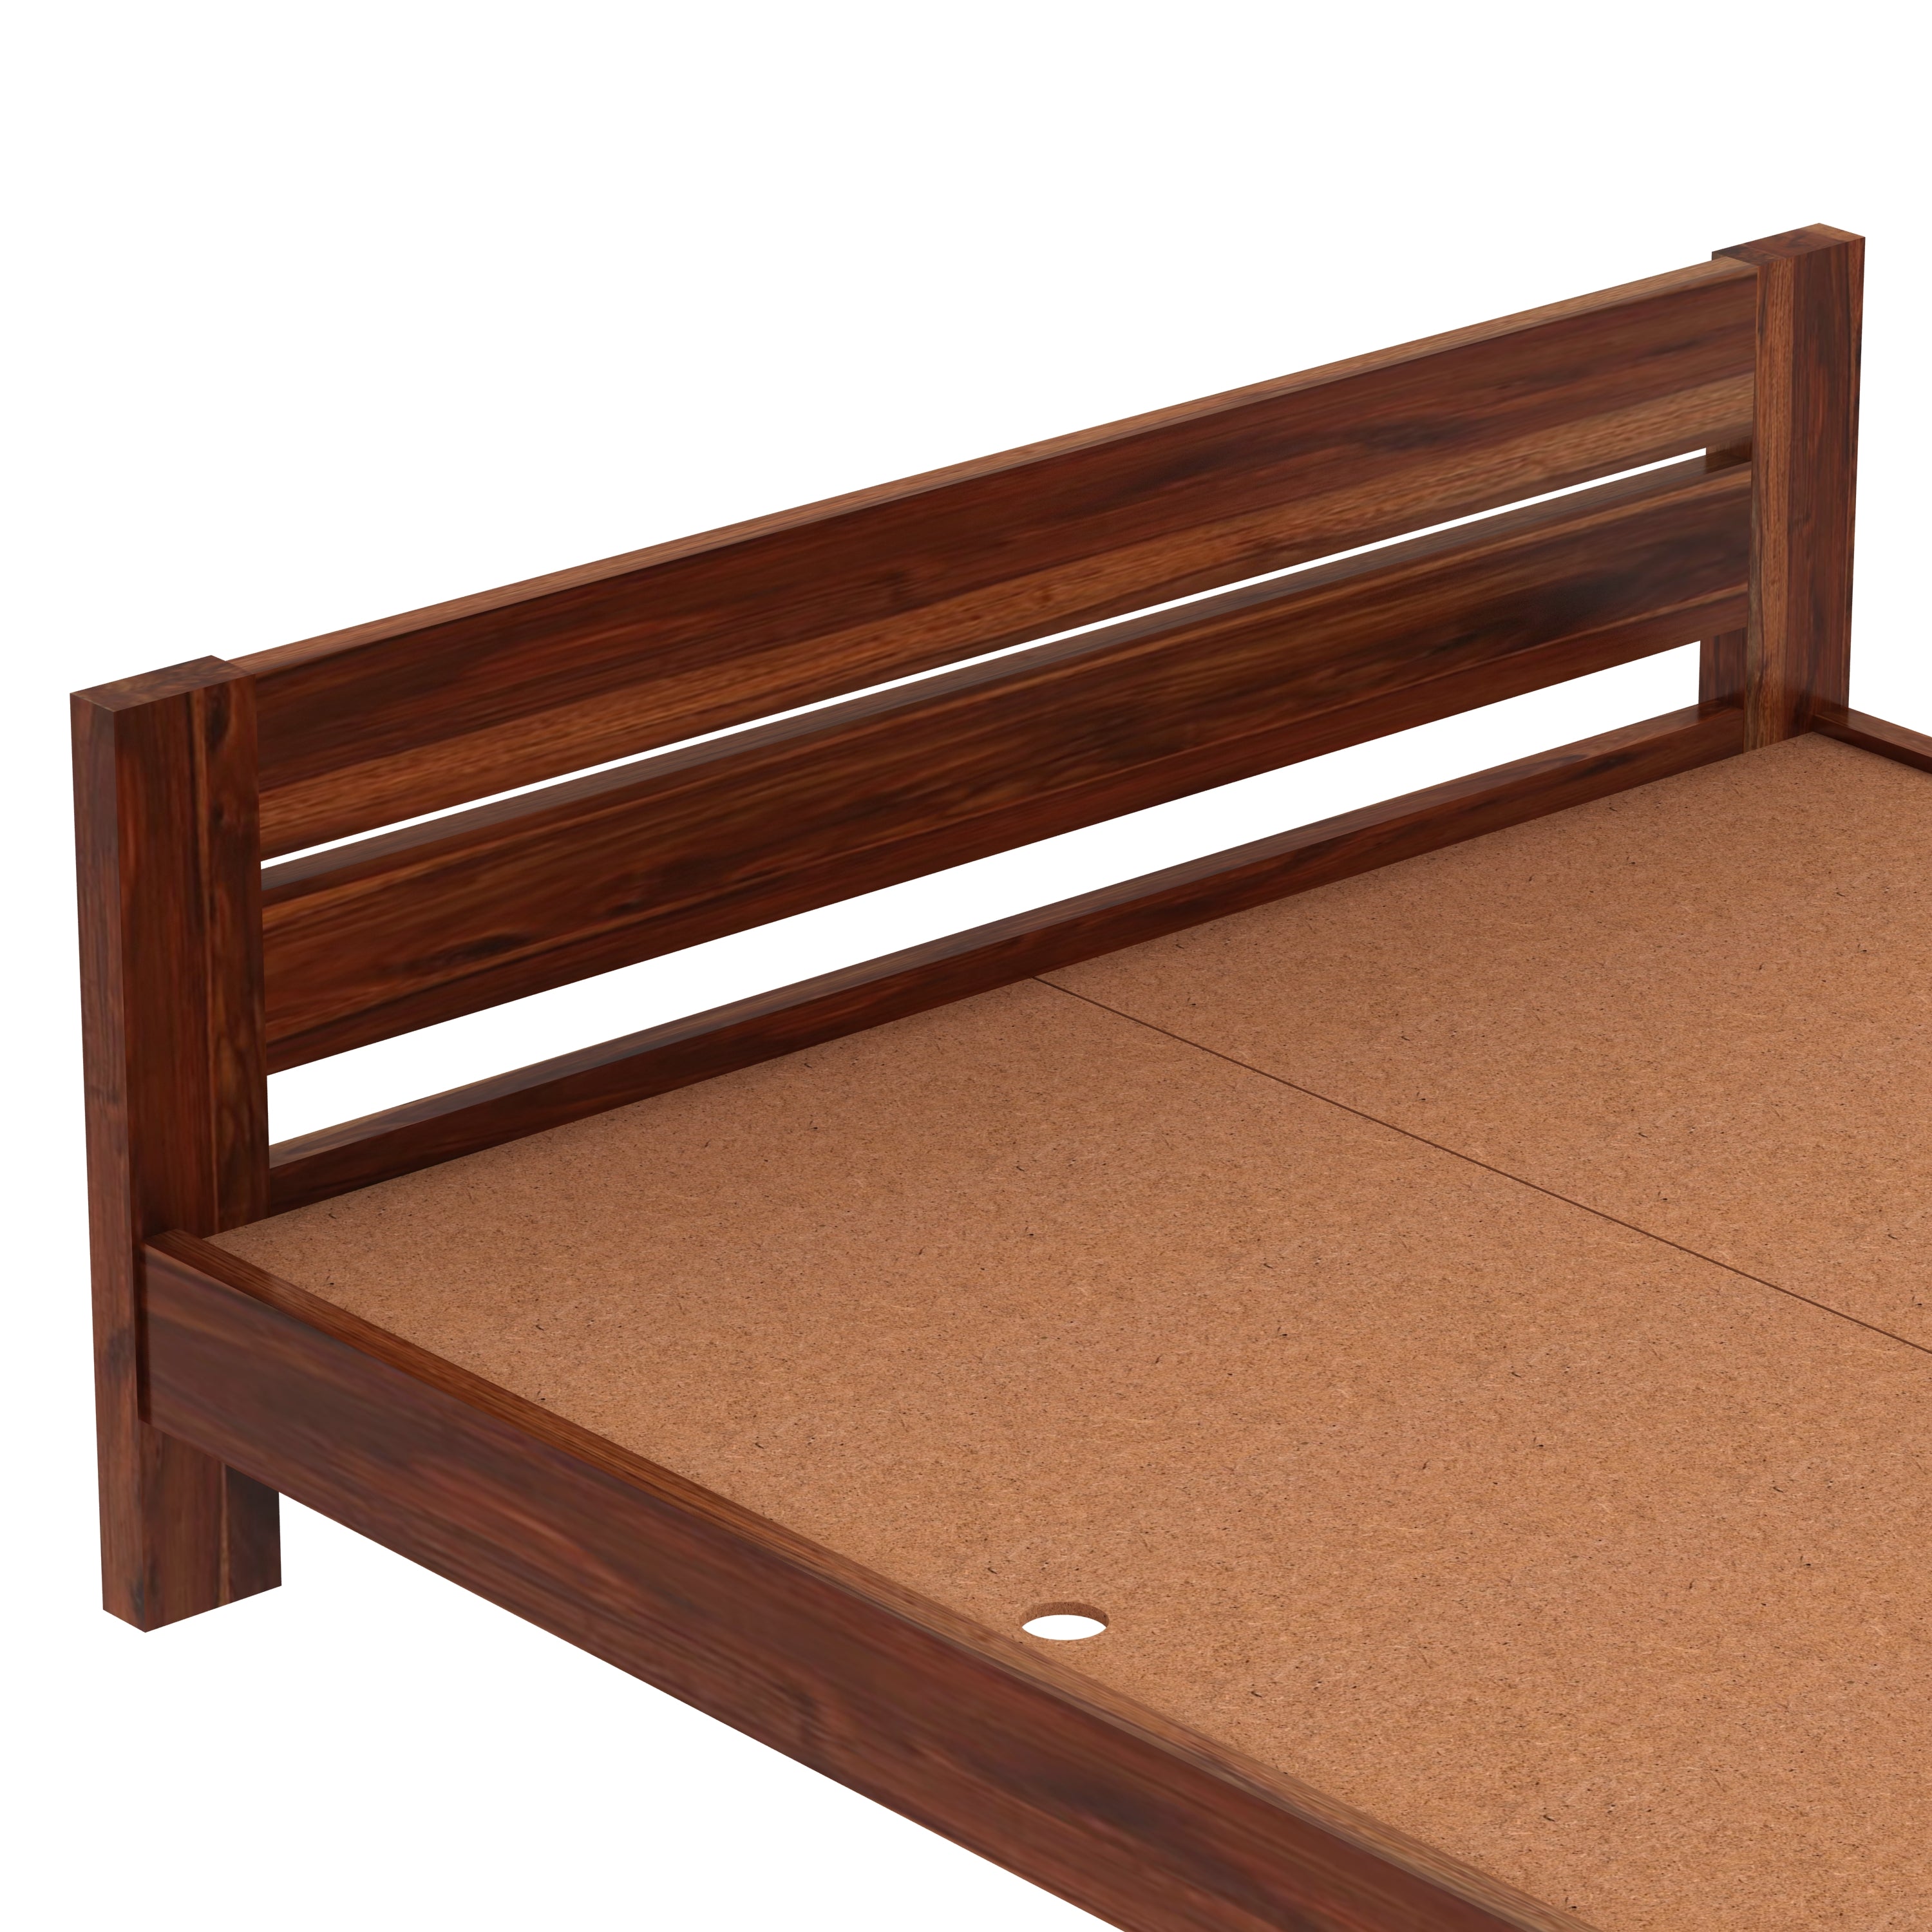 Maria Solid Sheesham Wood Bed Without Storage (Queen Size, Natural Finish)